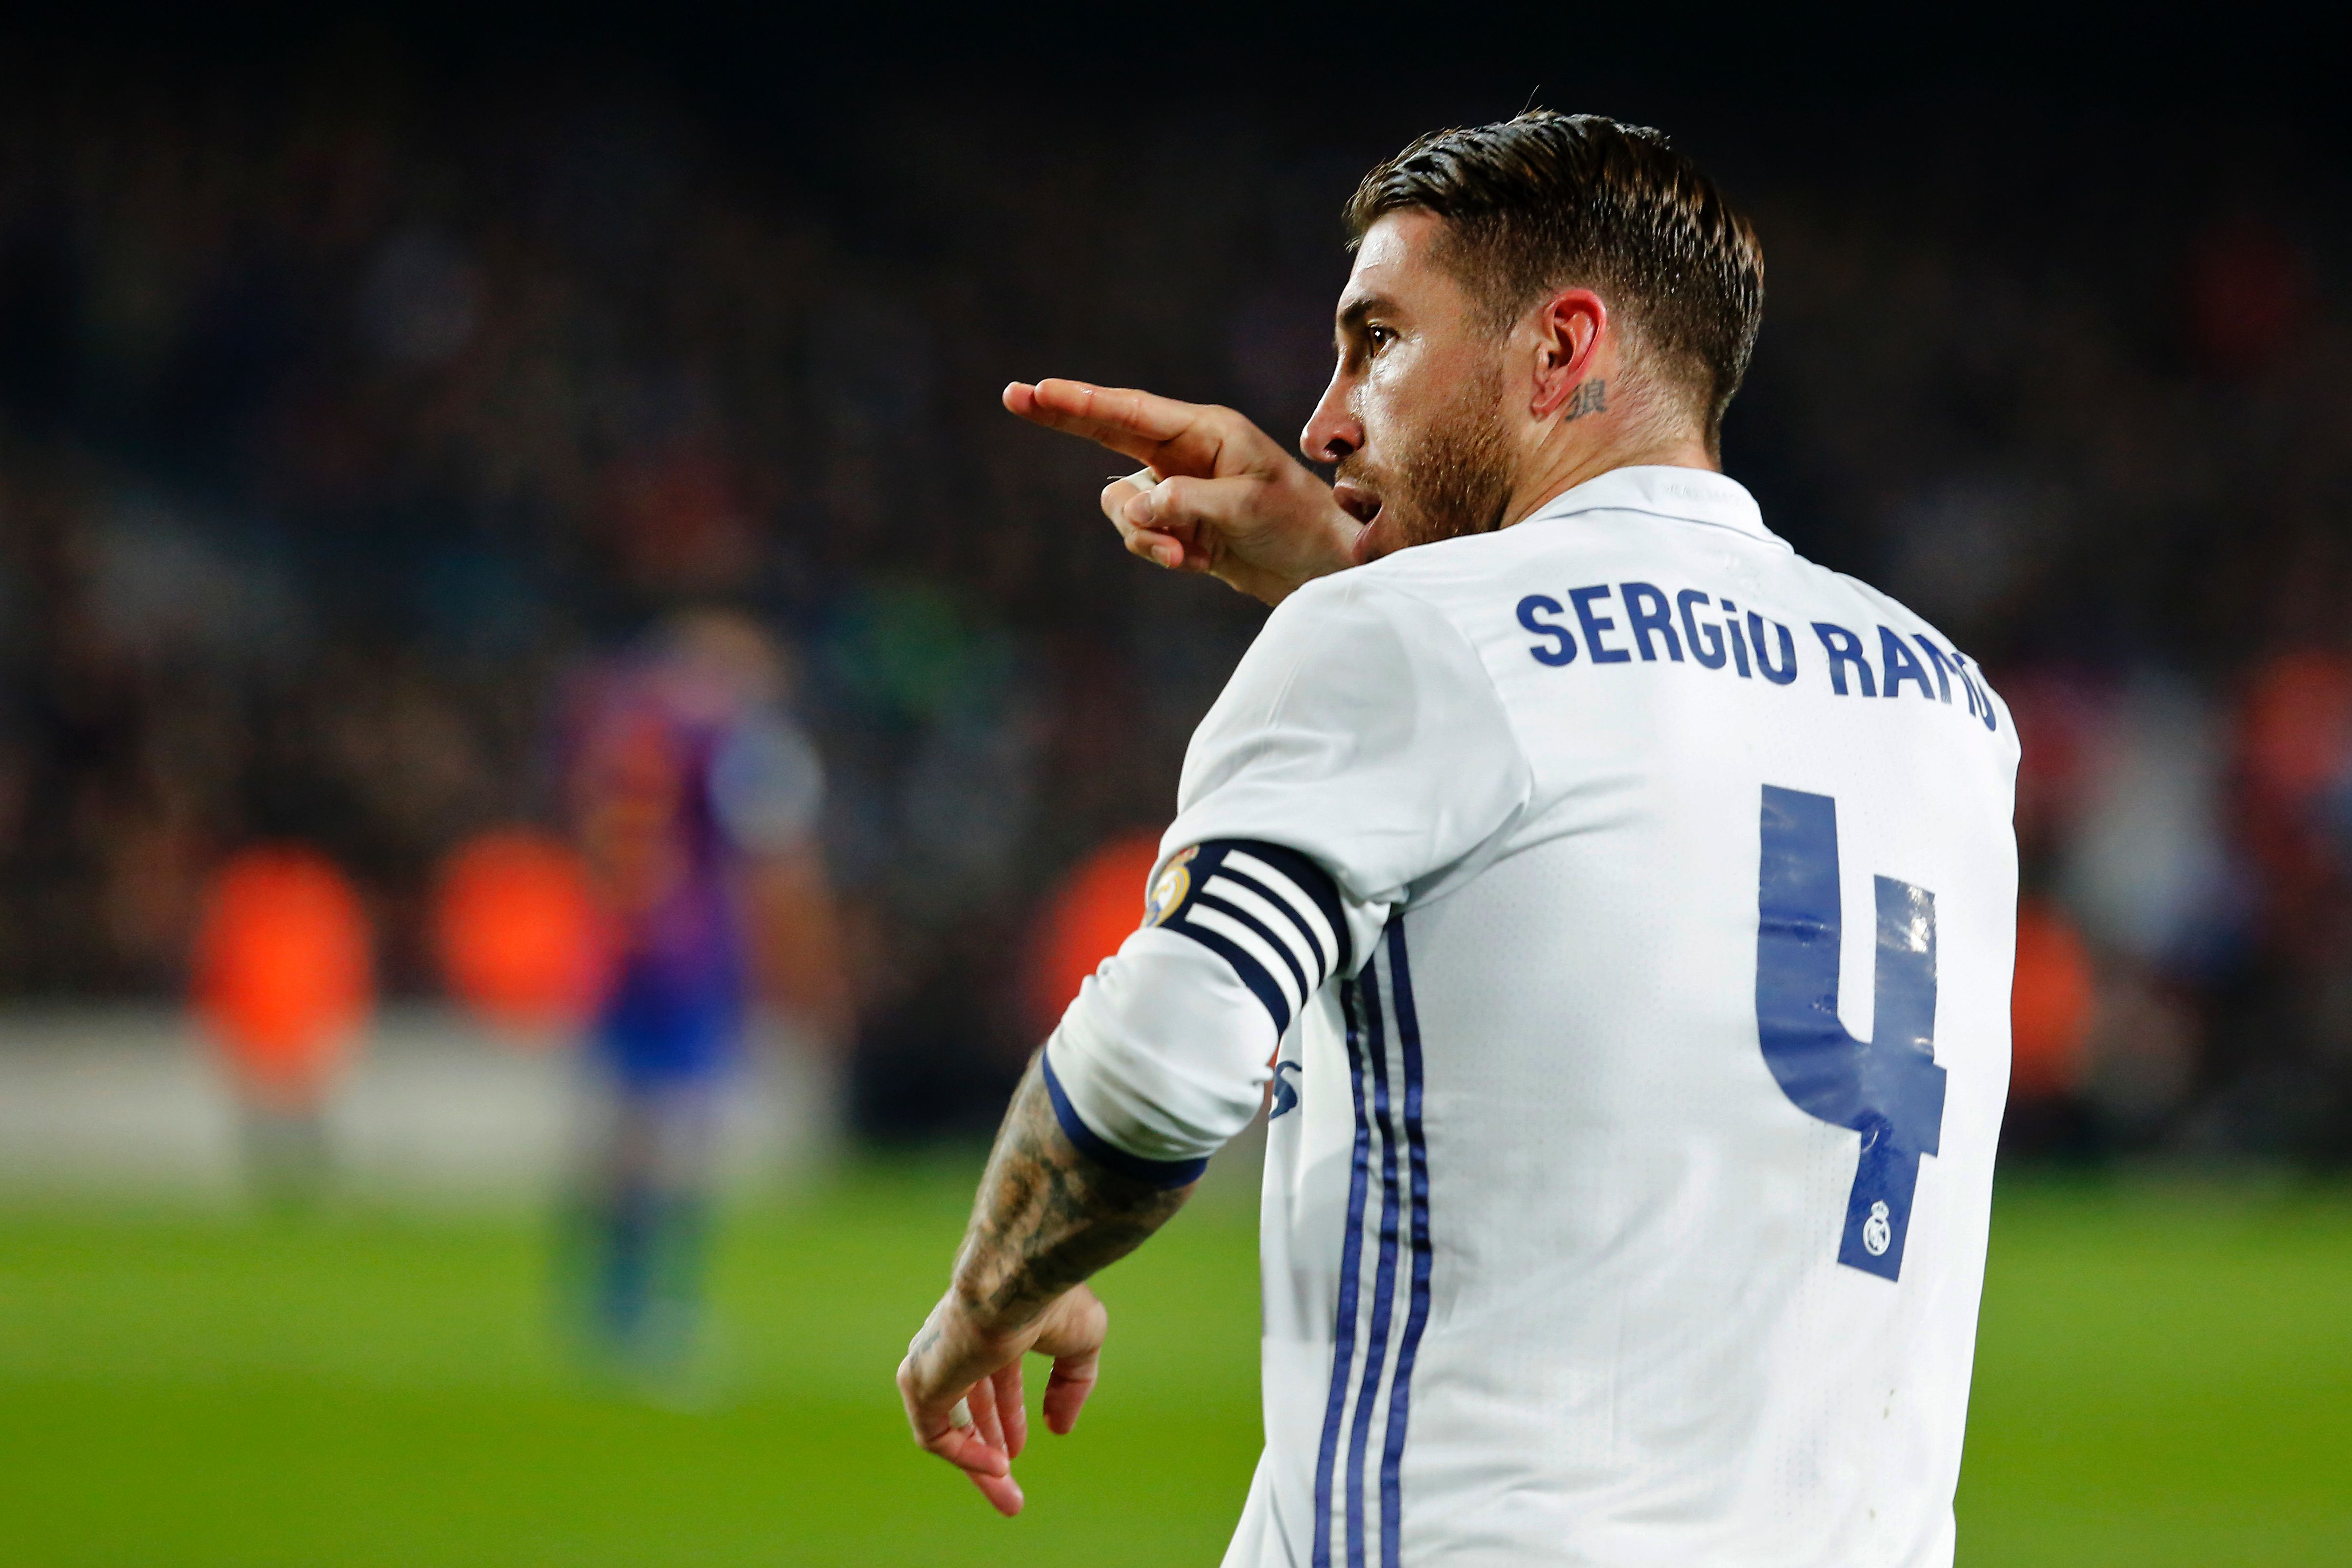 Real Madrid's defender Sergio Ramos celebrates after scoring the equalizer during the Spanish league football match FC Barcelona vs Real Madrid CF at the Camp Nou stadium in Barcelona on December 3, 2016. / AFP / PAU BARRENA        (Photo credit should read PAU BARRENA/AFP/Getty Images)